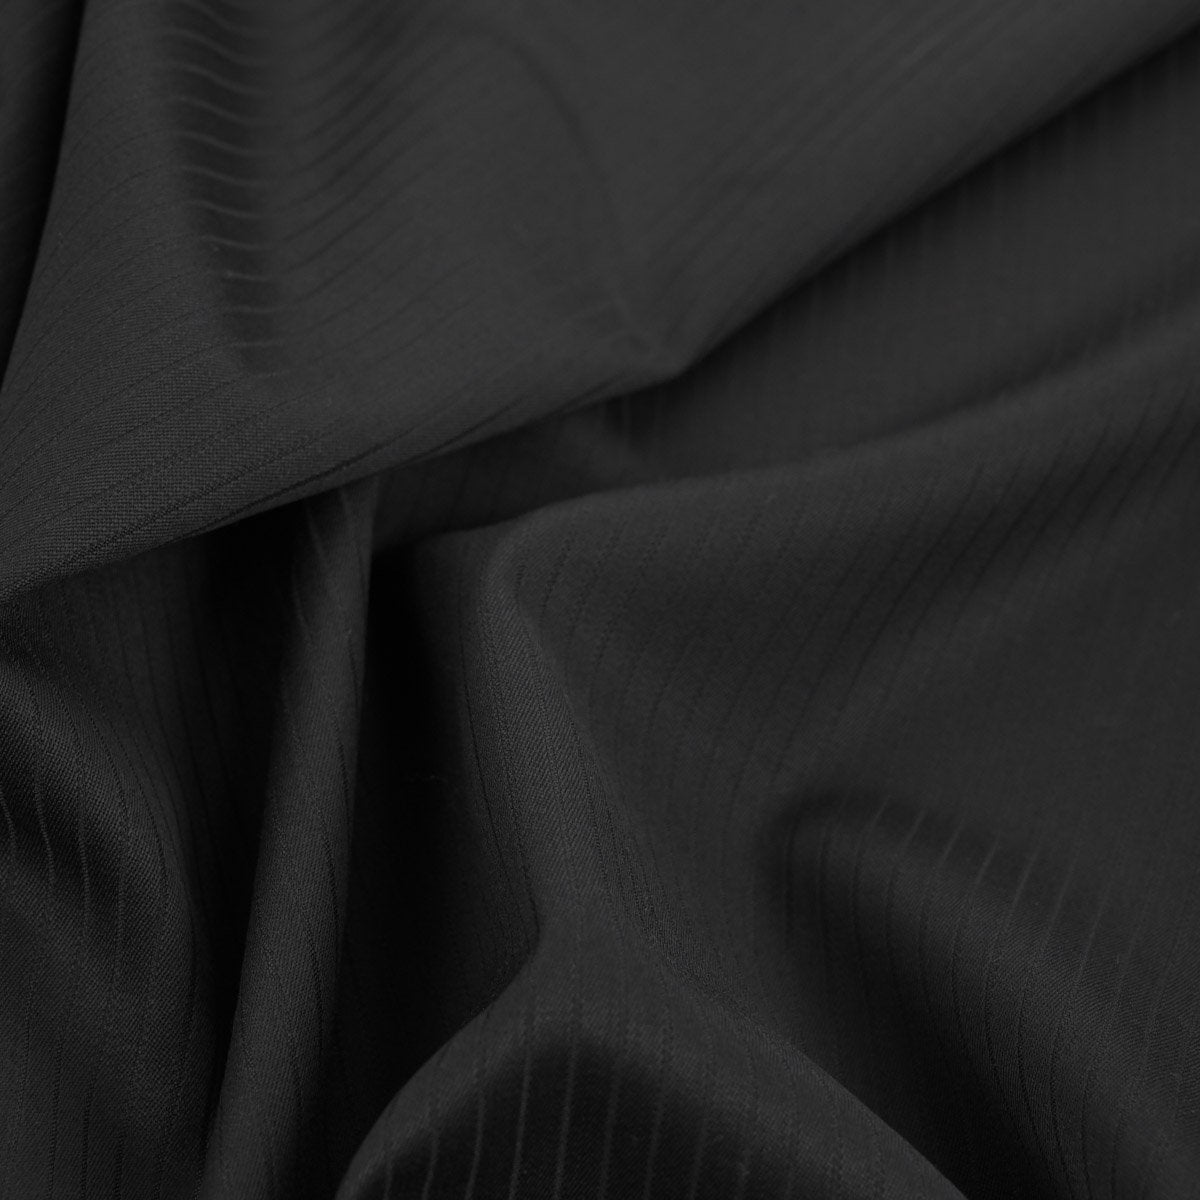 Black Stripped Suiting Fabric 97273